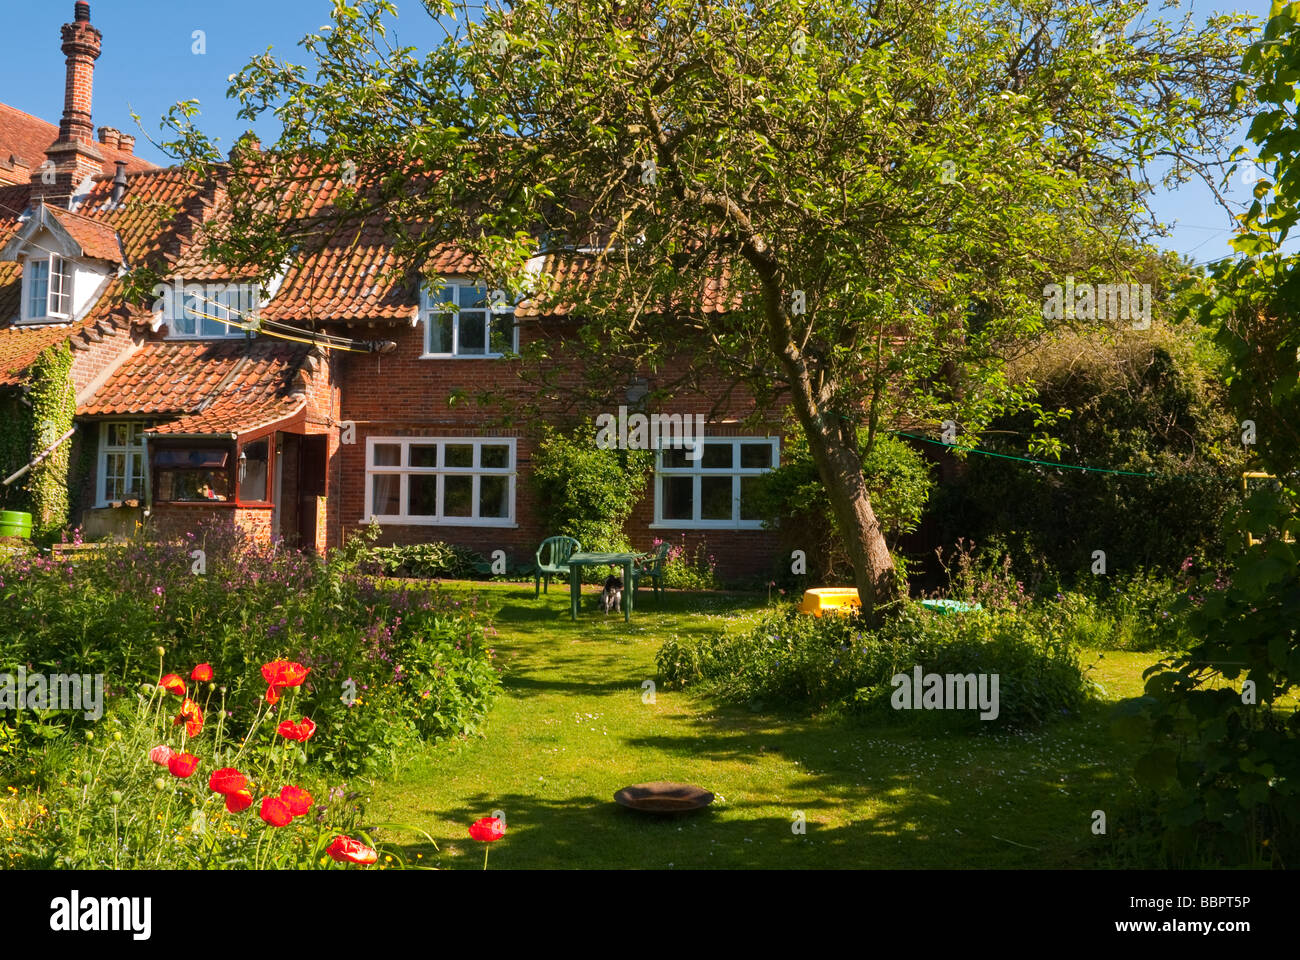 A lovely English country cottage in the spring with blooming garden and a view of a country life setting in Suffolk Uk Stock Photo